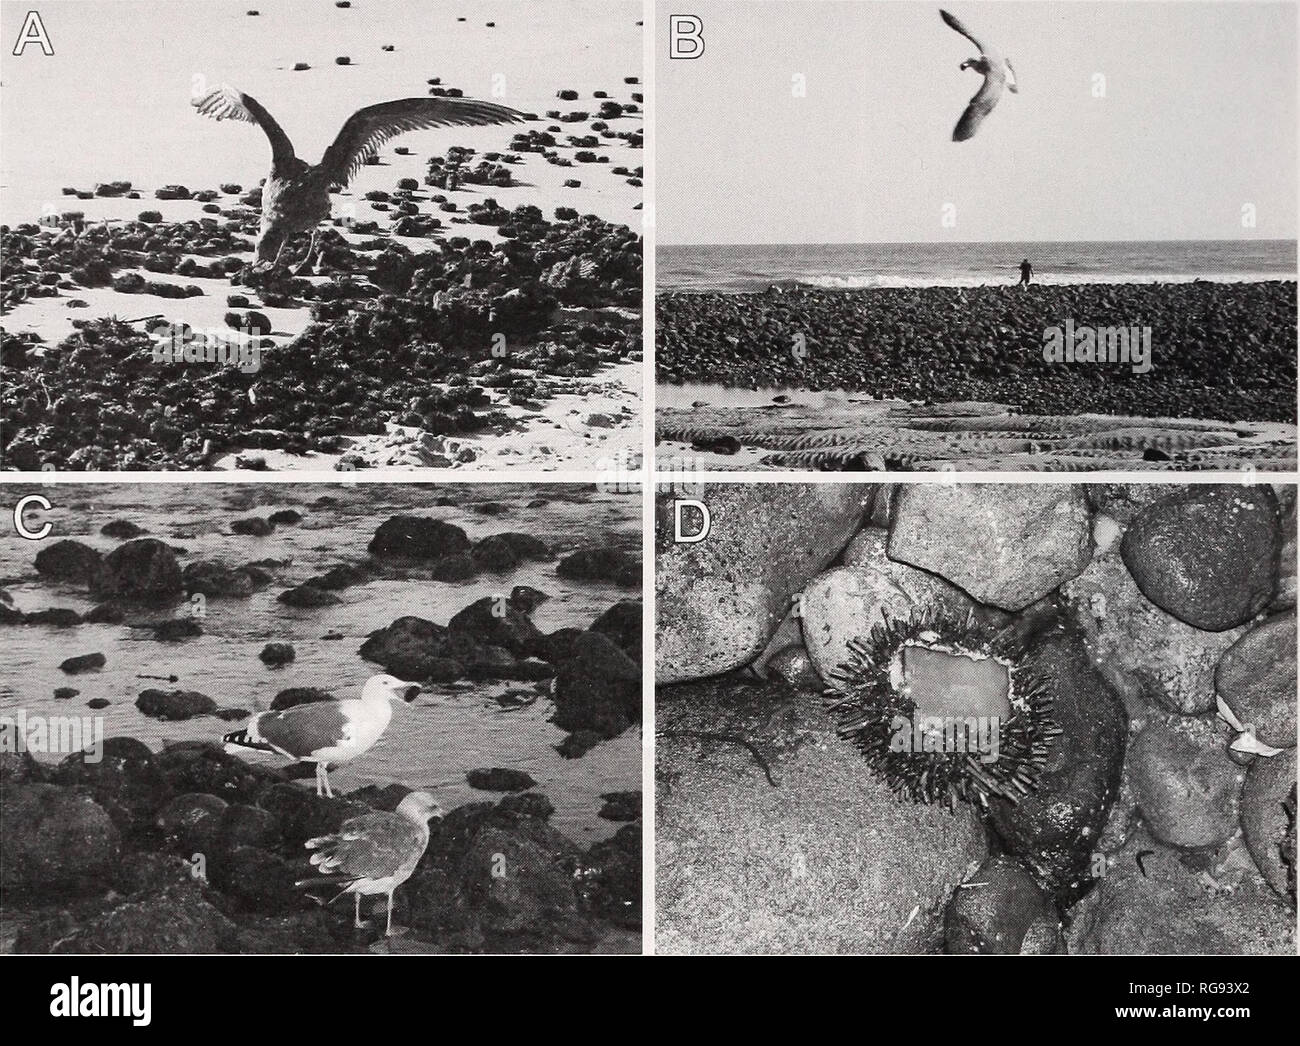 . Bulletin - Southern California Academy of Sciences. Science. 28 SOUTHERN CALIFORNIA ACADEMY OF SCIENCES. Fig. 4. Examples of predation by western seagulls (Larus occidentalis) on purple sea urchins {Strongylocentrotus purpuratus) at Malibu Lagoon State Beach. A) L. occidentalis feeding on freshly stranded, dead sea urchins on October 9, 2010. B) Airborne L. occidentalis attempting to drop and break a sea urchin on intertidal cobbles, October 26, 2011. C) L. occidentalis preying on intertidal S. purpuratus at dusk on October 15, 2011. D) Remains of S. purpuratus eaten by a seagull that fractu Stock Photo